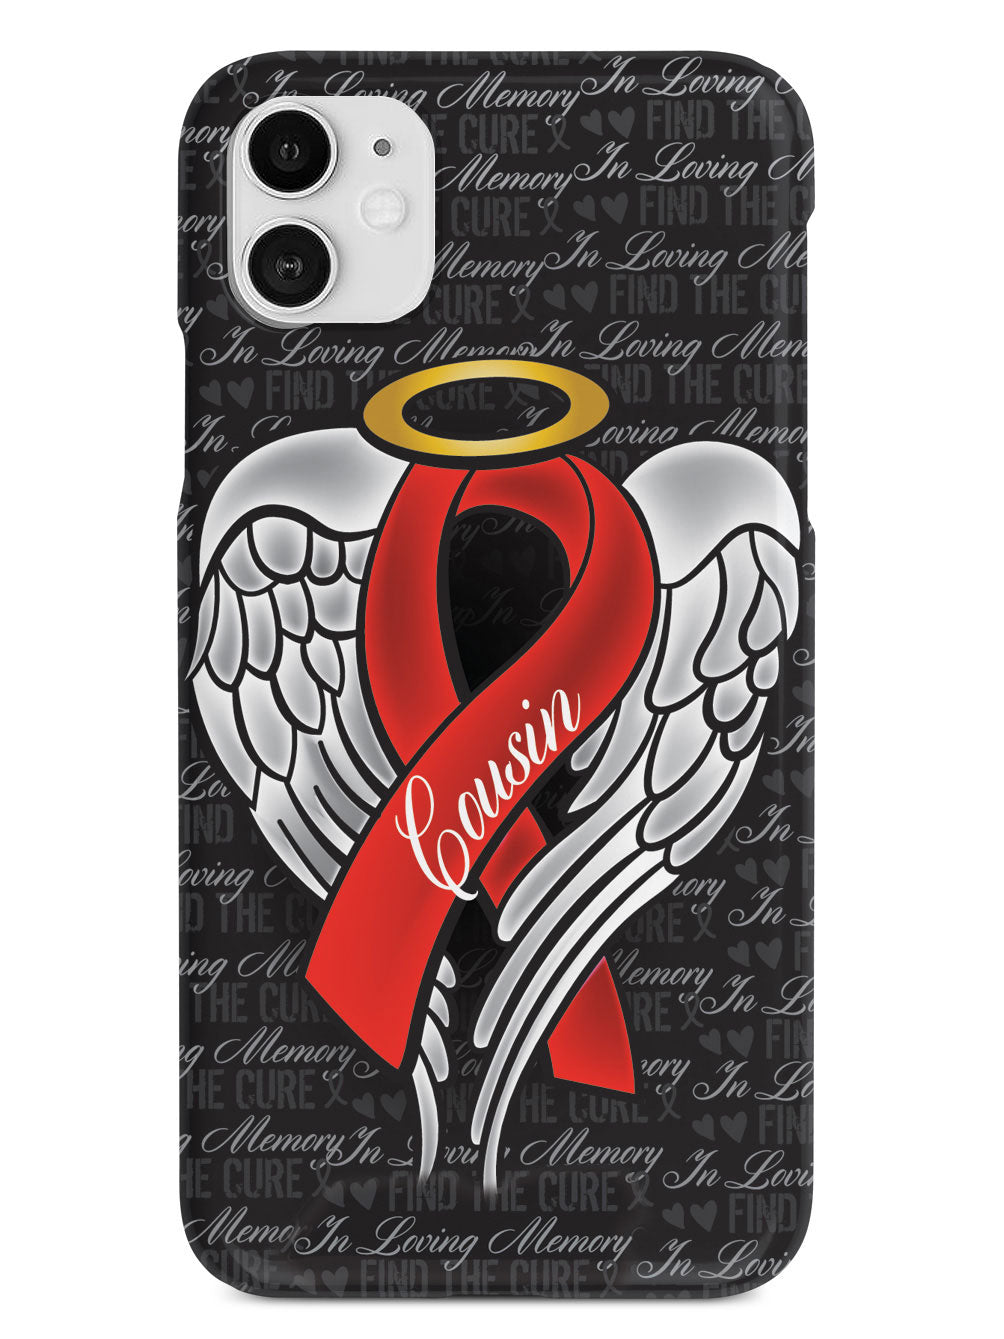 In Loving Memory of My Cousin - Red Ribbon Case